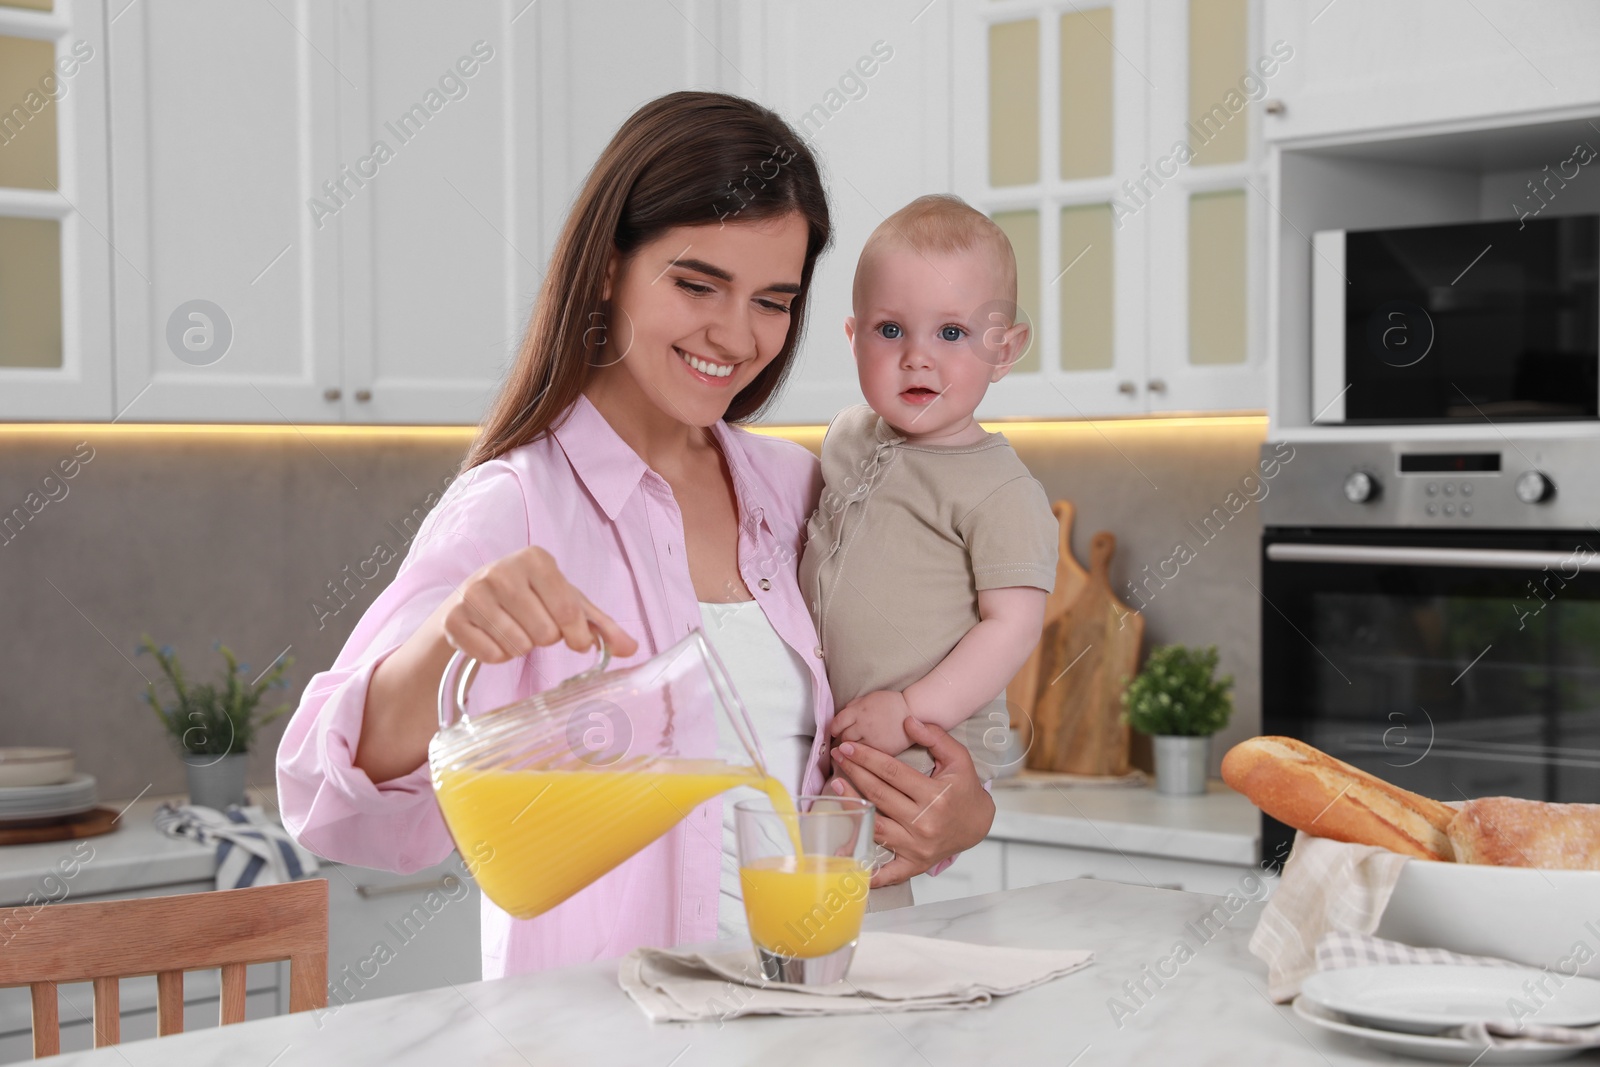 Photo of Happy young woman holding her cute little baby while pouring juice into glass in kitchen